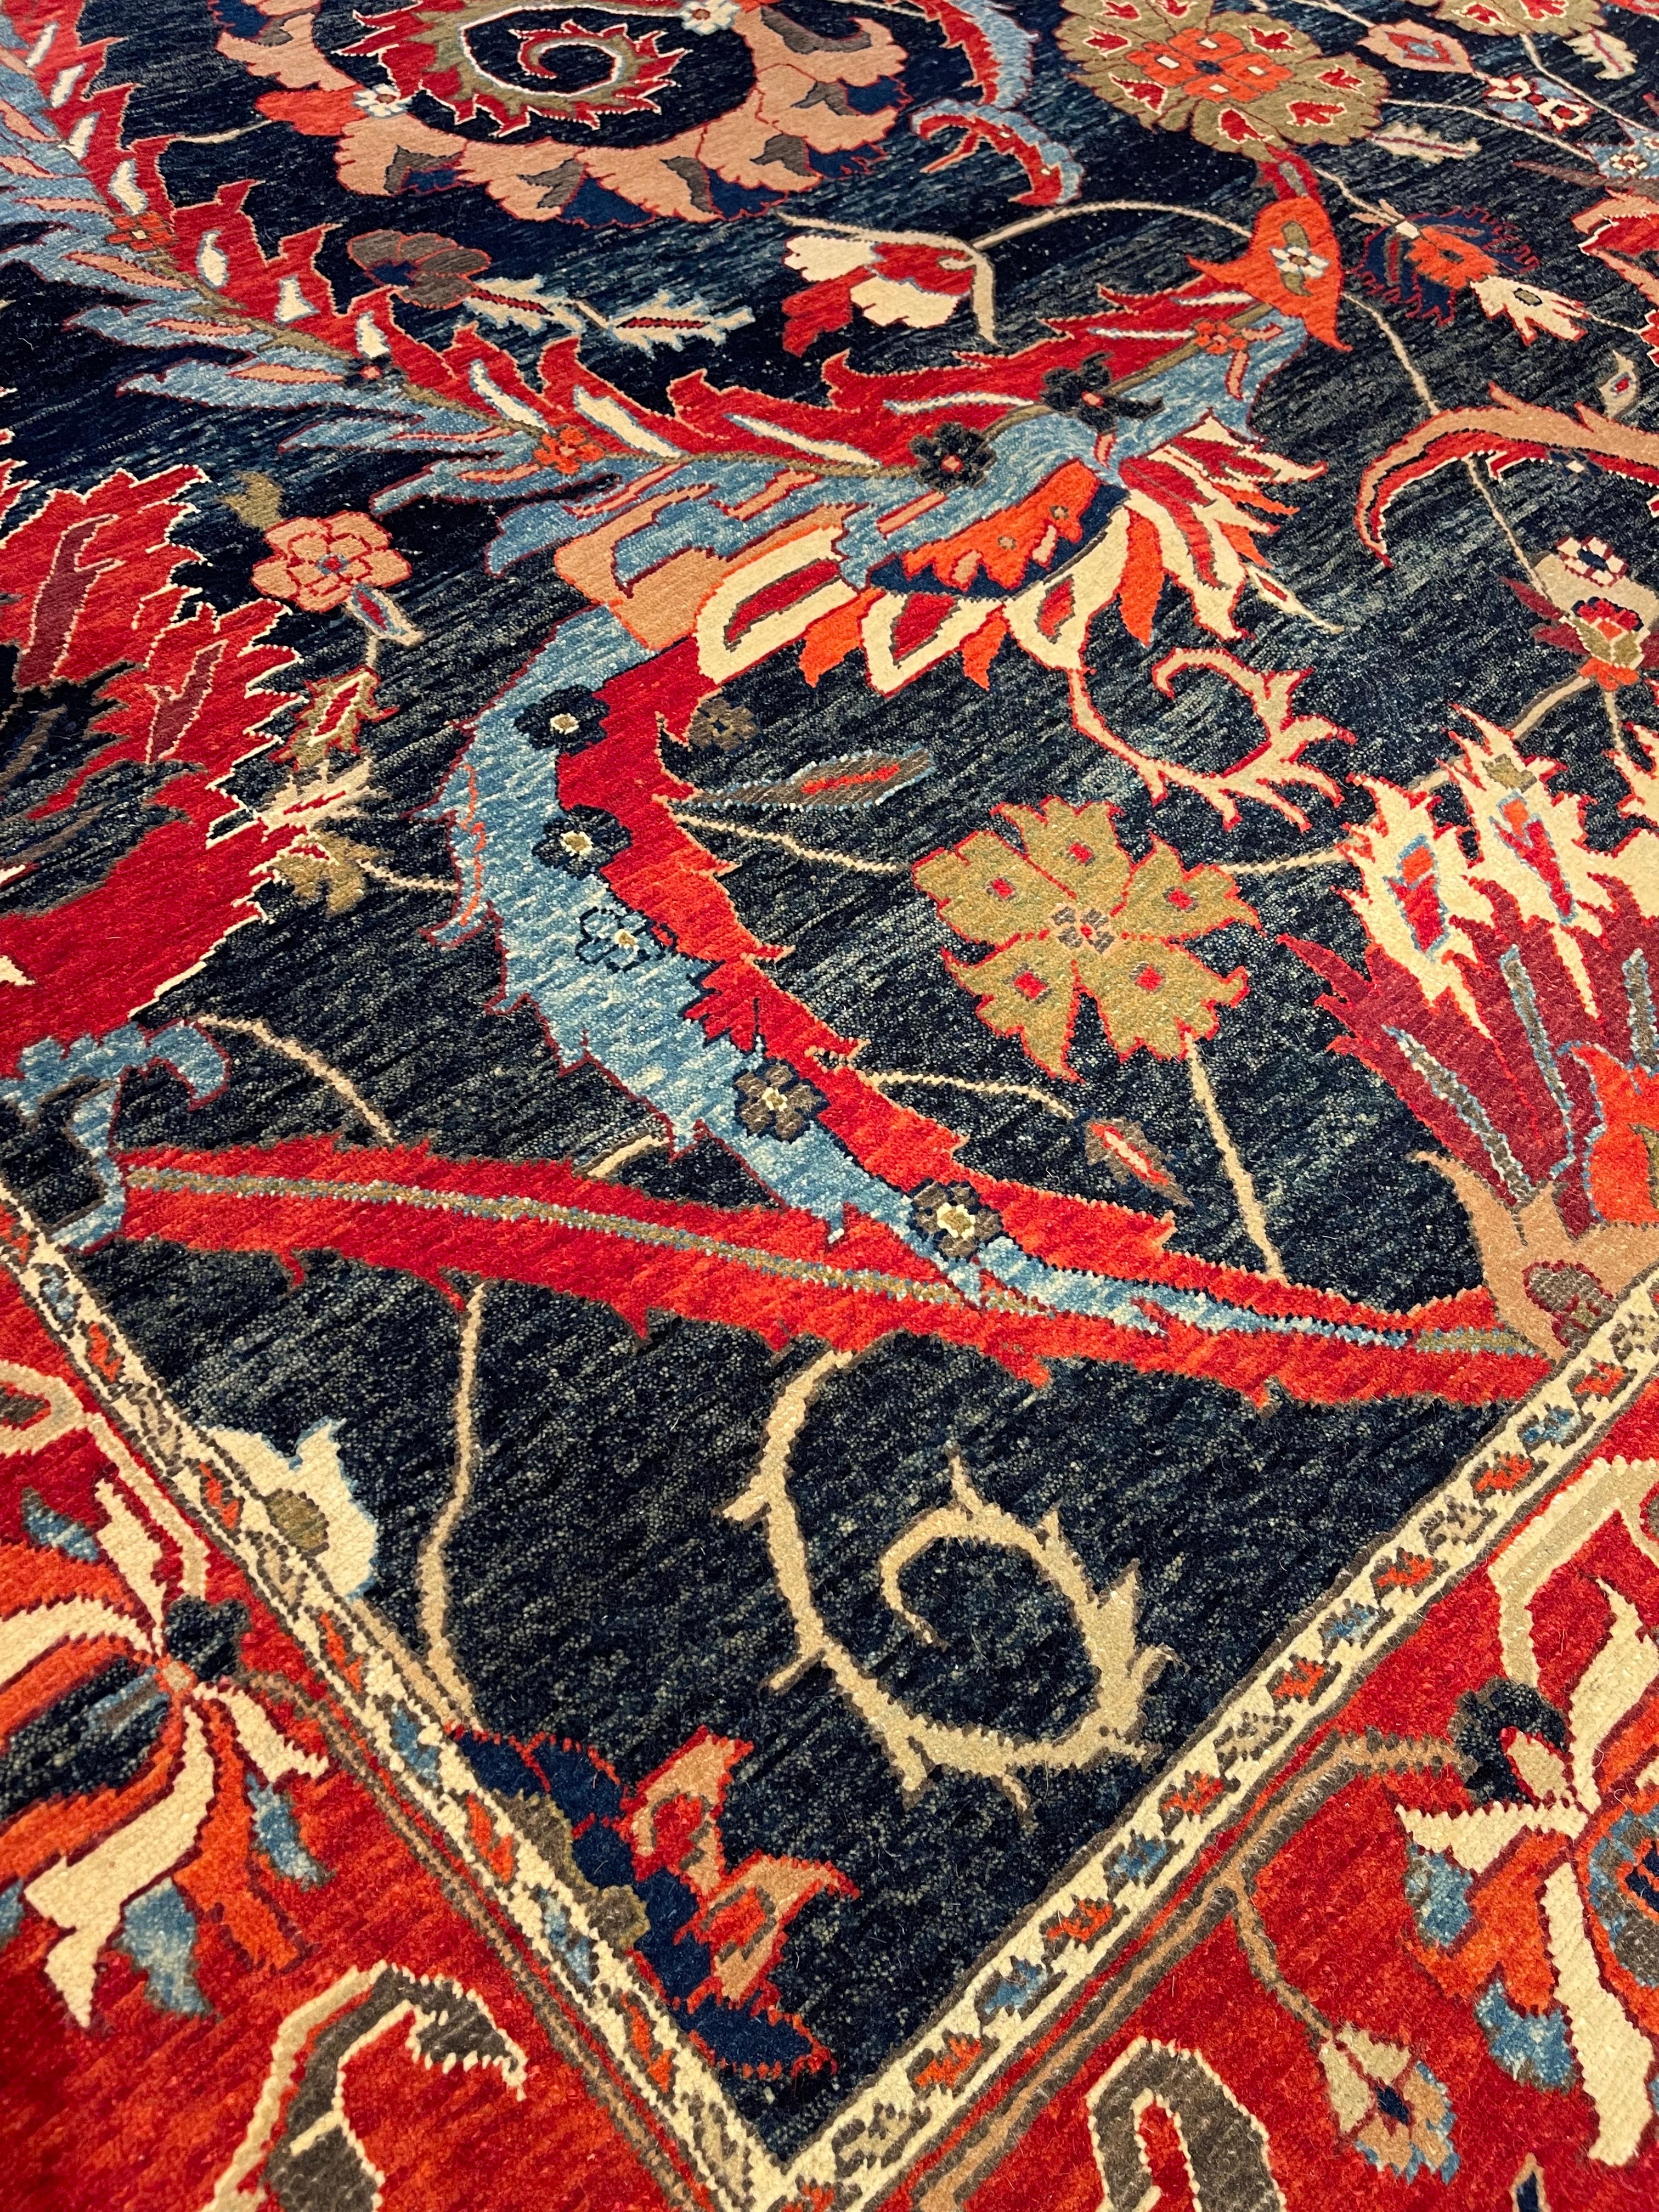 The source of carpet comes from the book Museo Calouste Gulbenkian, Printed by Gulbenkian Museum Lisbon, in 2015, nr.52. This is a vase-technique carpet design in the 17th century in the Kerman region, of Persia. In the 16th century, in Safavid